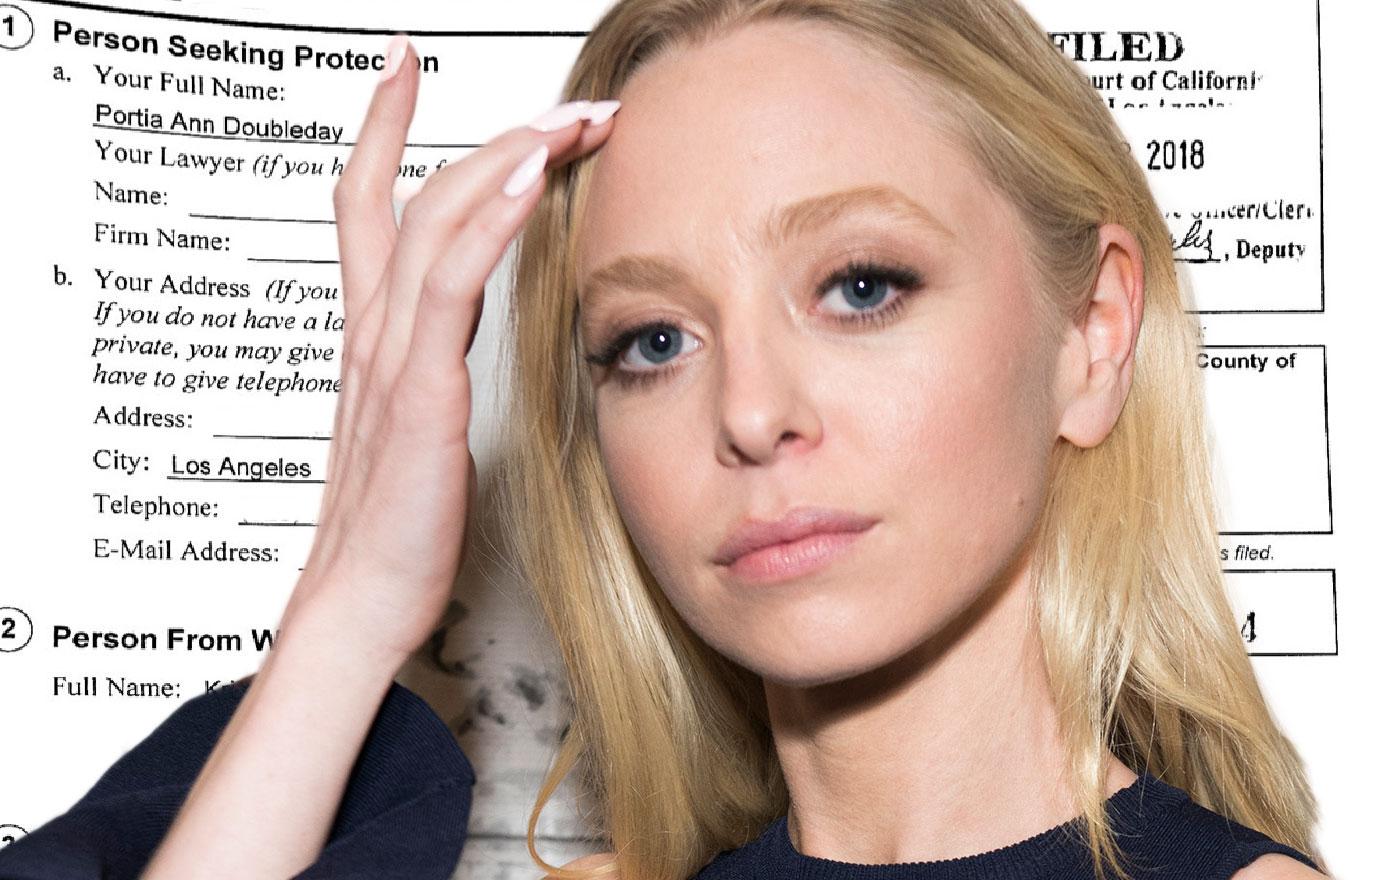 Mr Robot Star Portia Doubleday Claims She’s Being Extorted